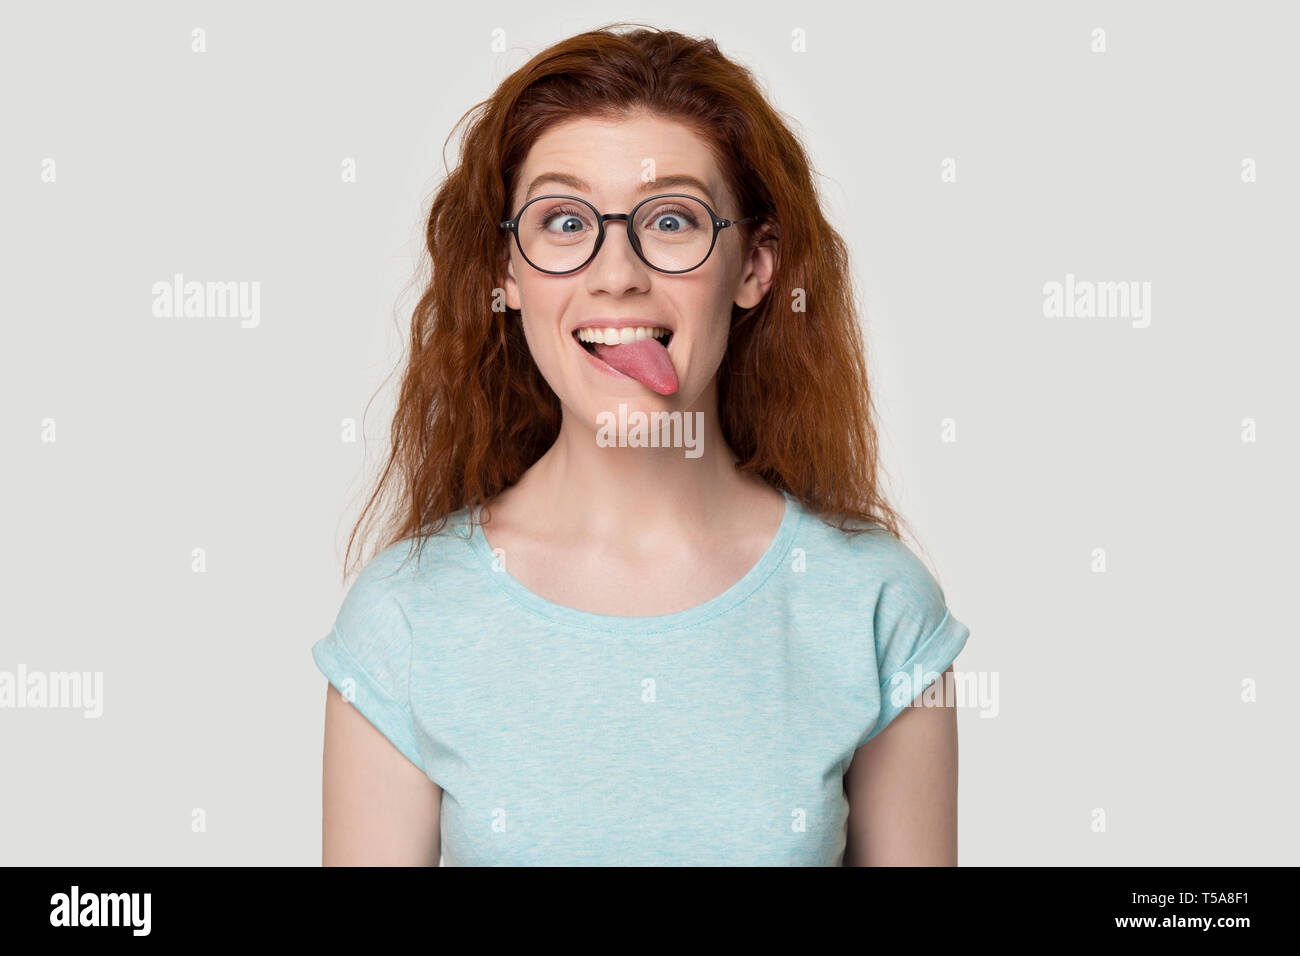 Funny red-haired girl in glasses play childish showing tongue Stock Photo